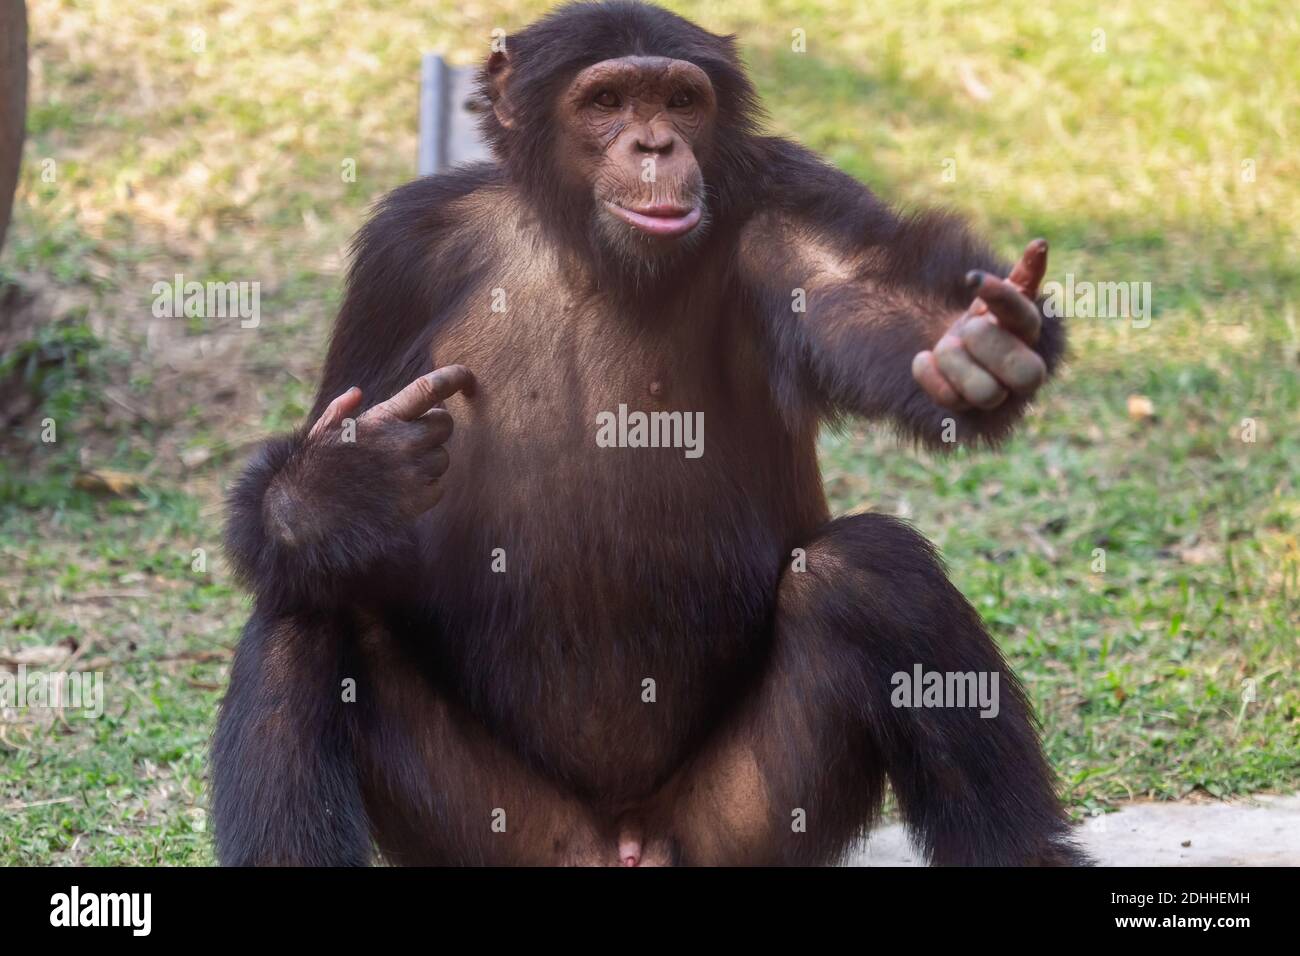 Chimpanzee ape extending his hand for food at an Indian animal reserve Stock Photo